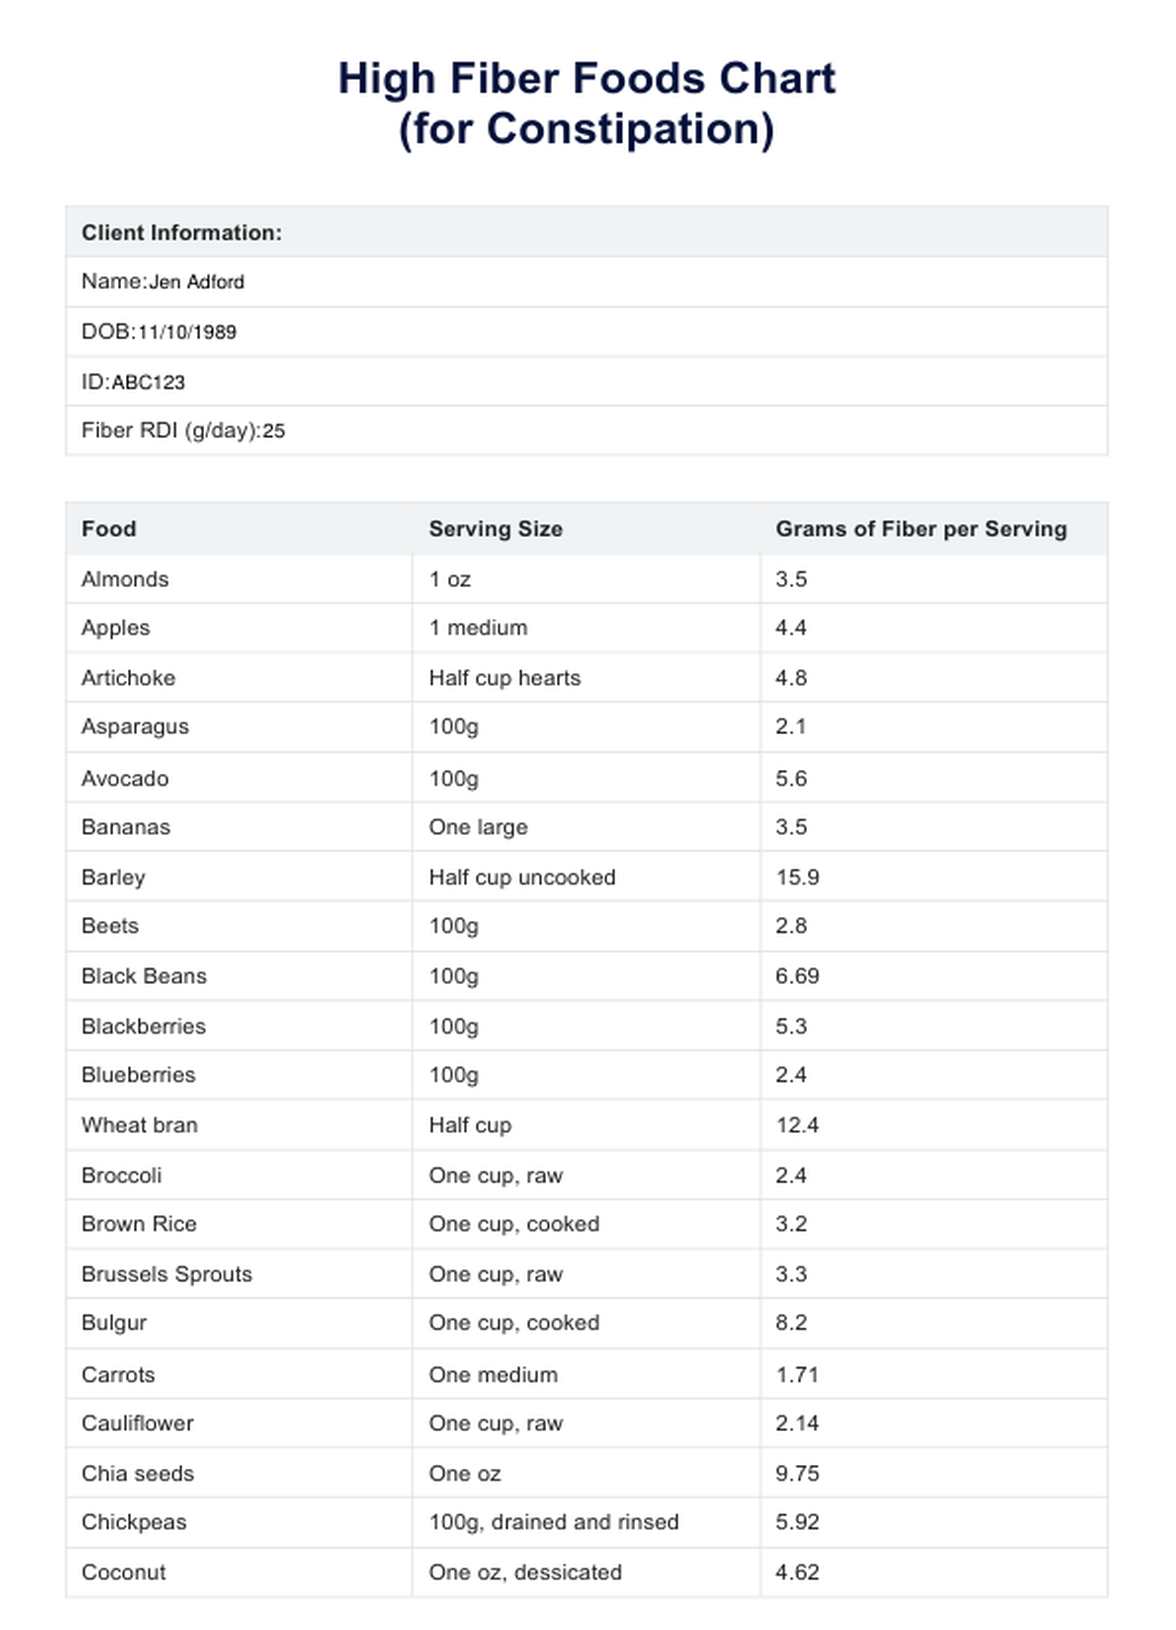 High Fiber Foods Chart for Constipation PDF Example